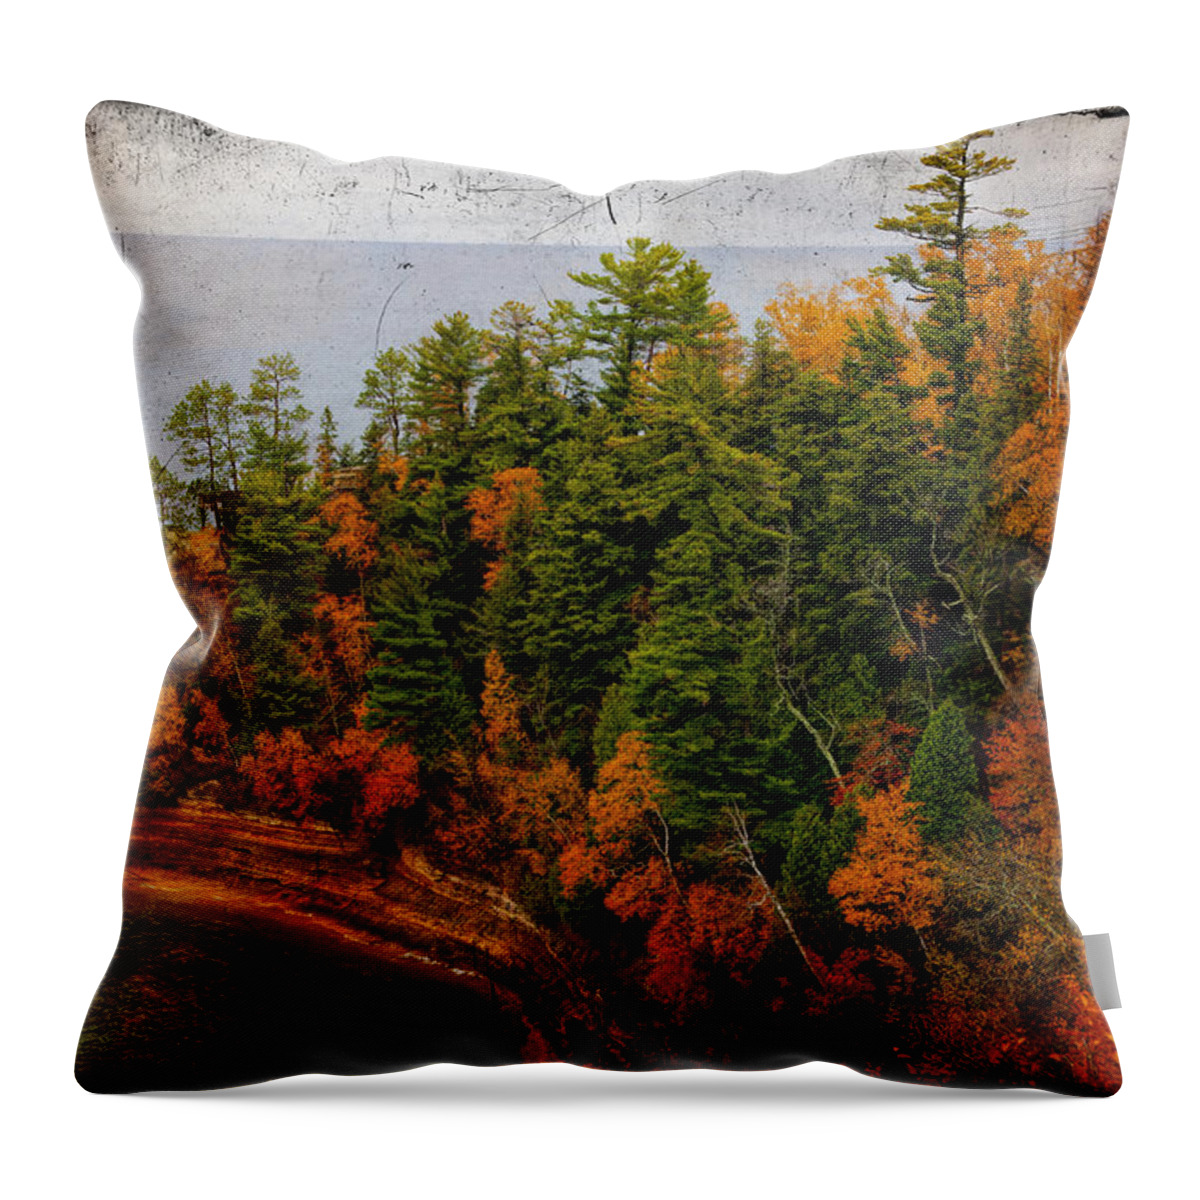 Pictured Rocks Throw Pillow featuring the photograph Pictured Rocks Michigan with Tobacco Filter by Evie Carrier